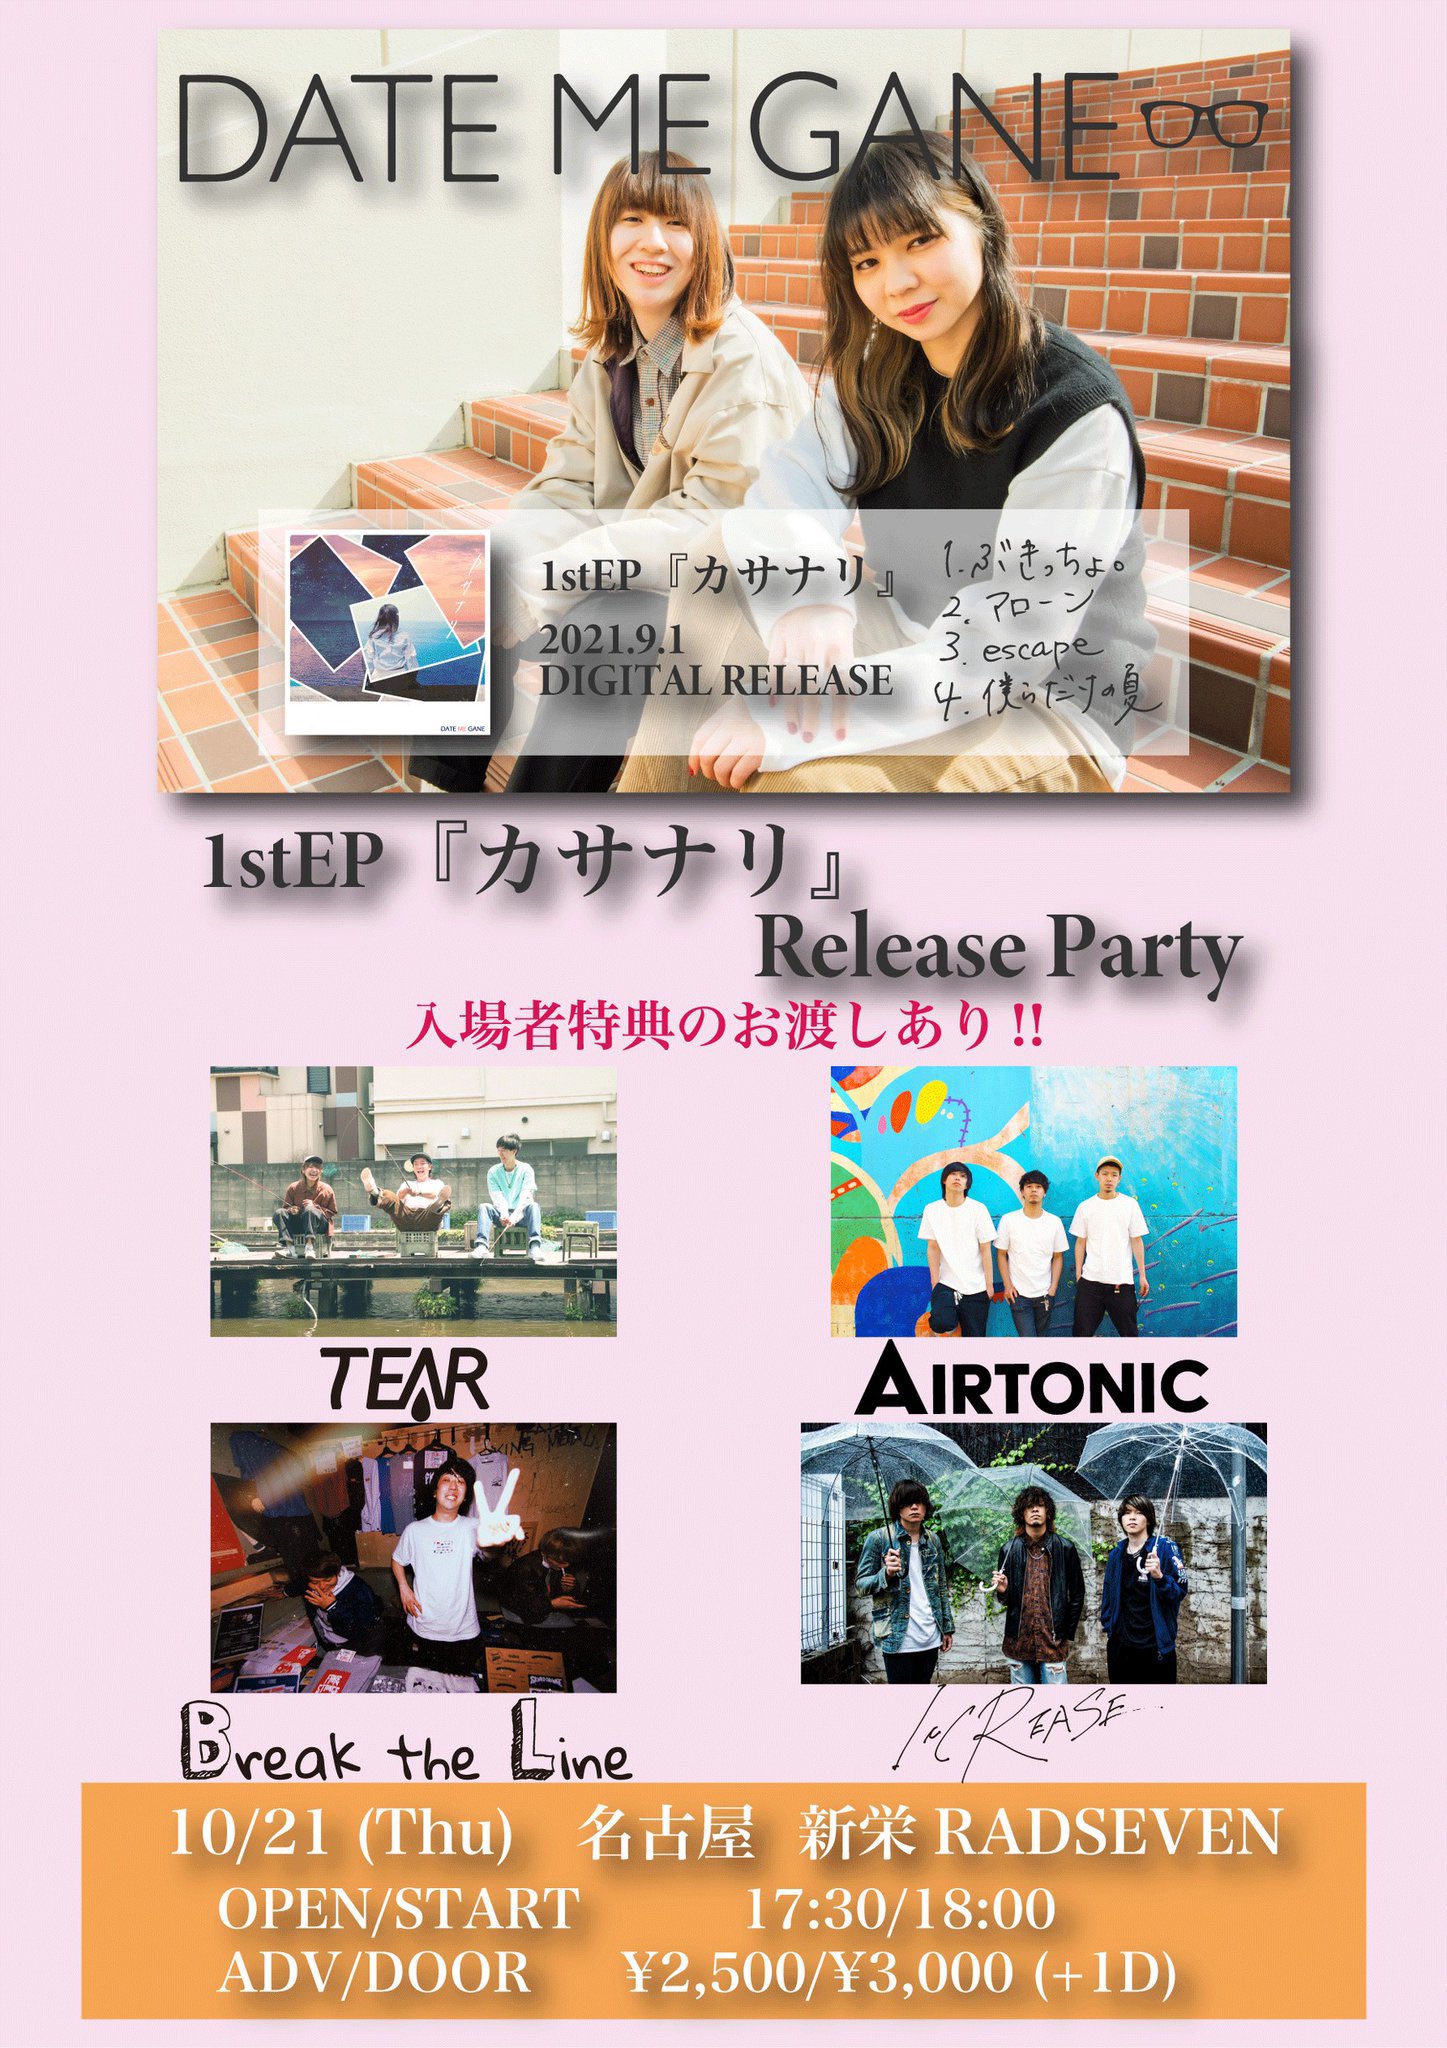 DATE ME GANE  1st EP『カサナリ』Release Party